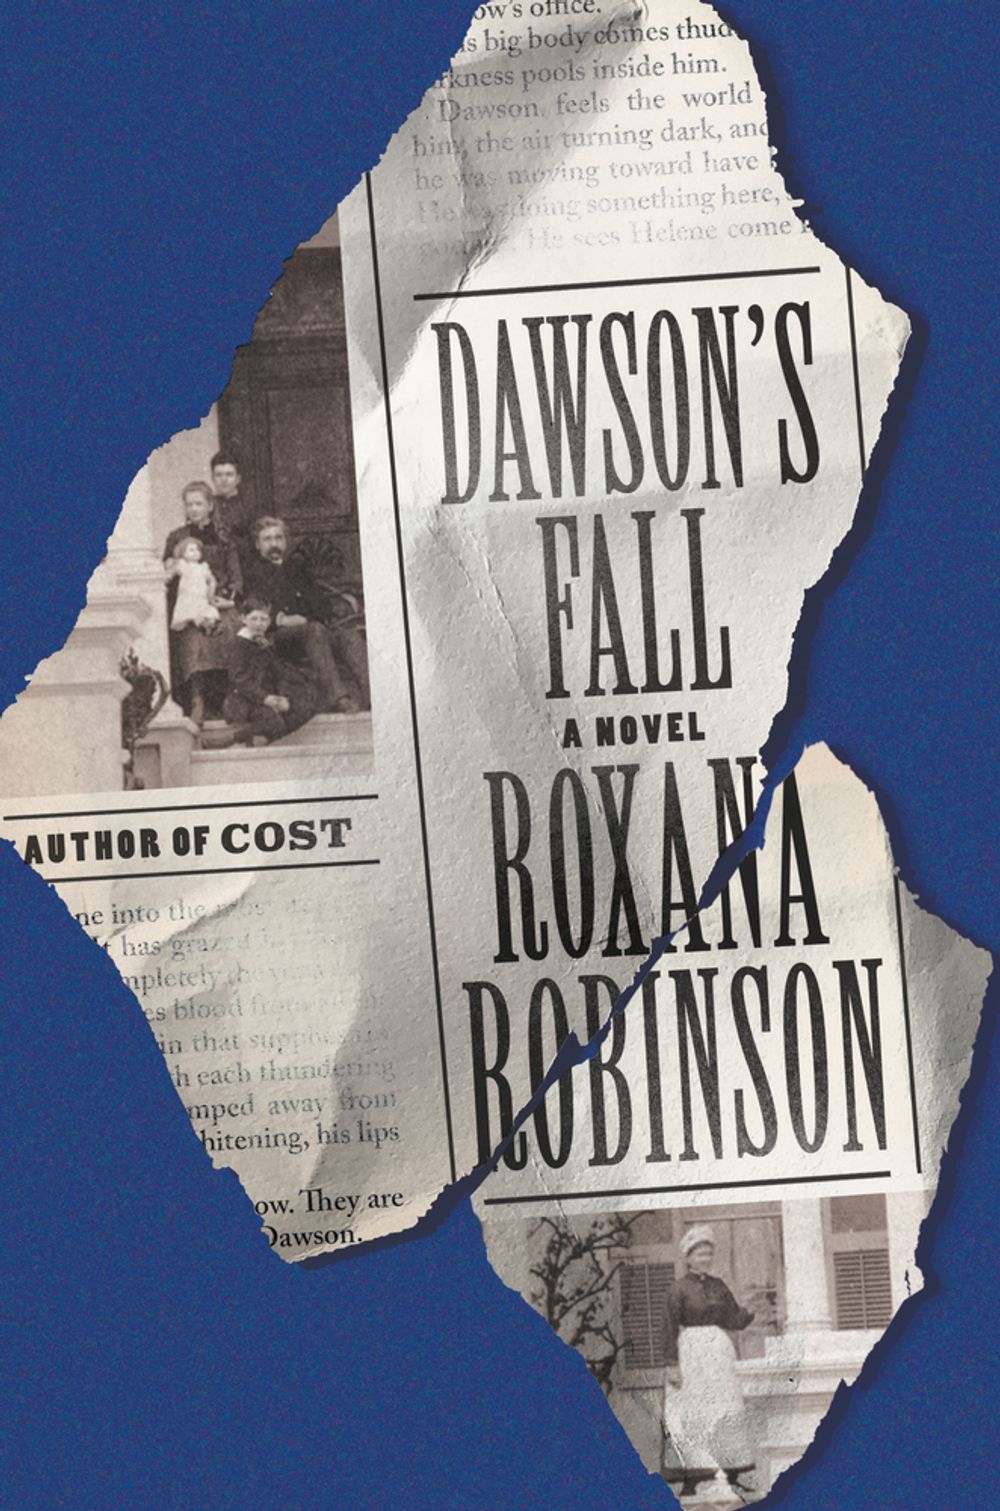 cover image of the book Dawson’s Fall